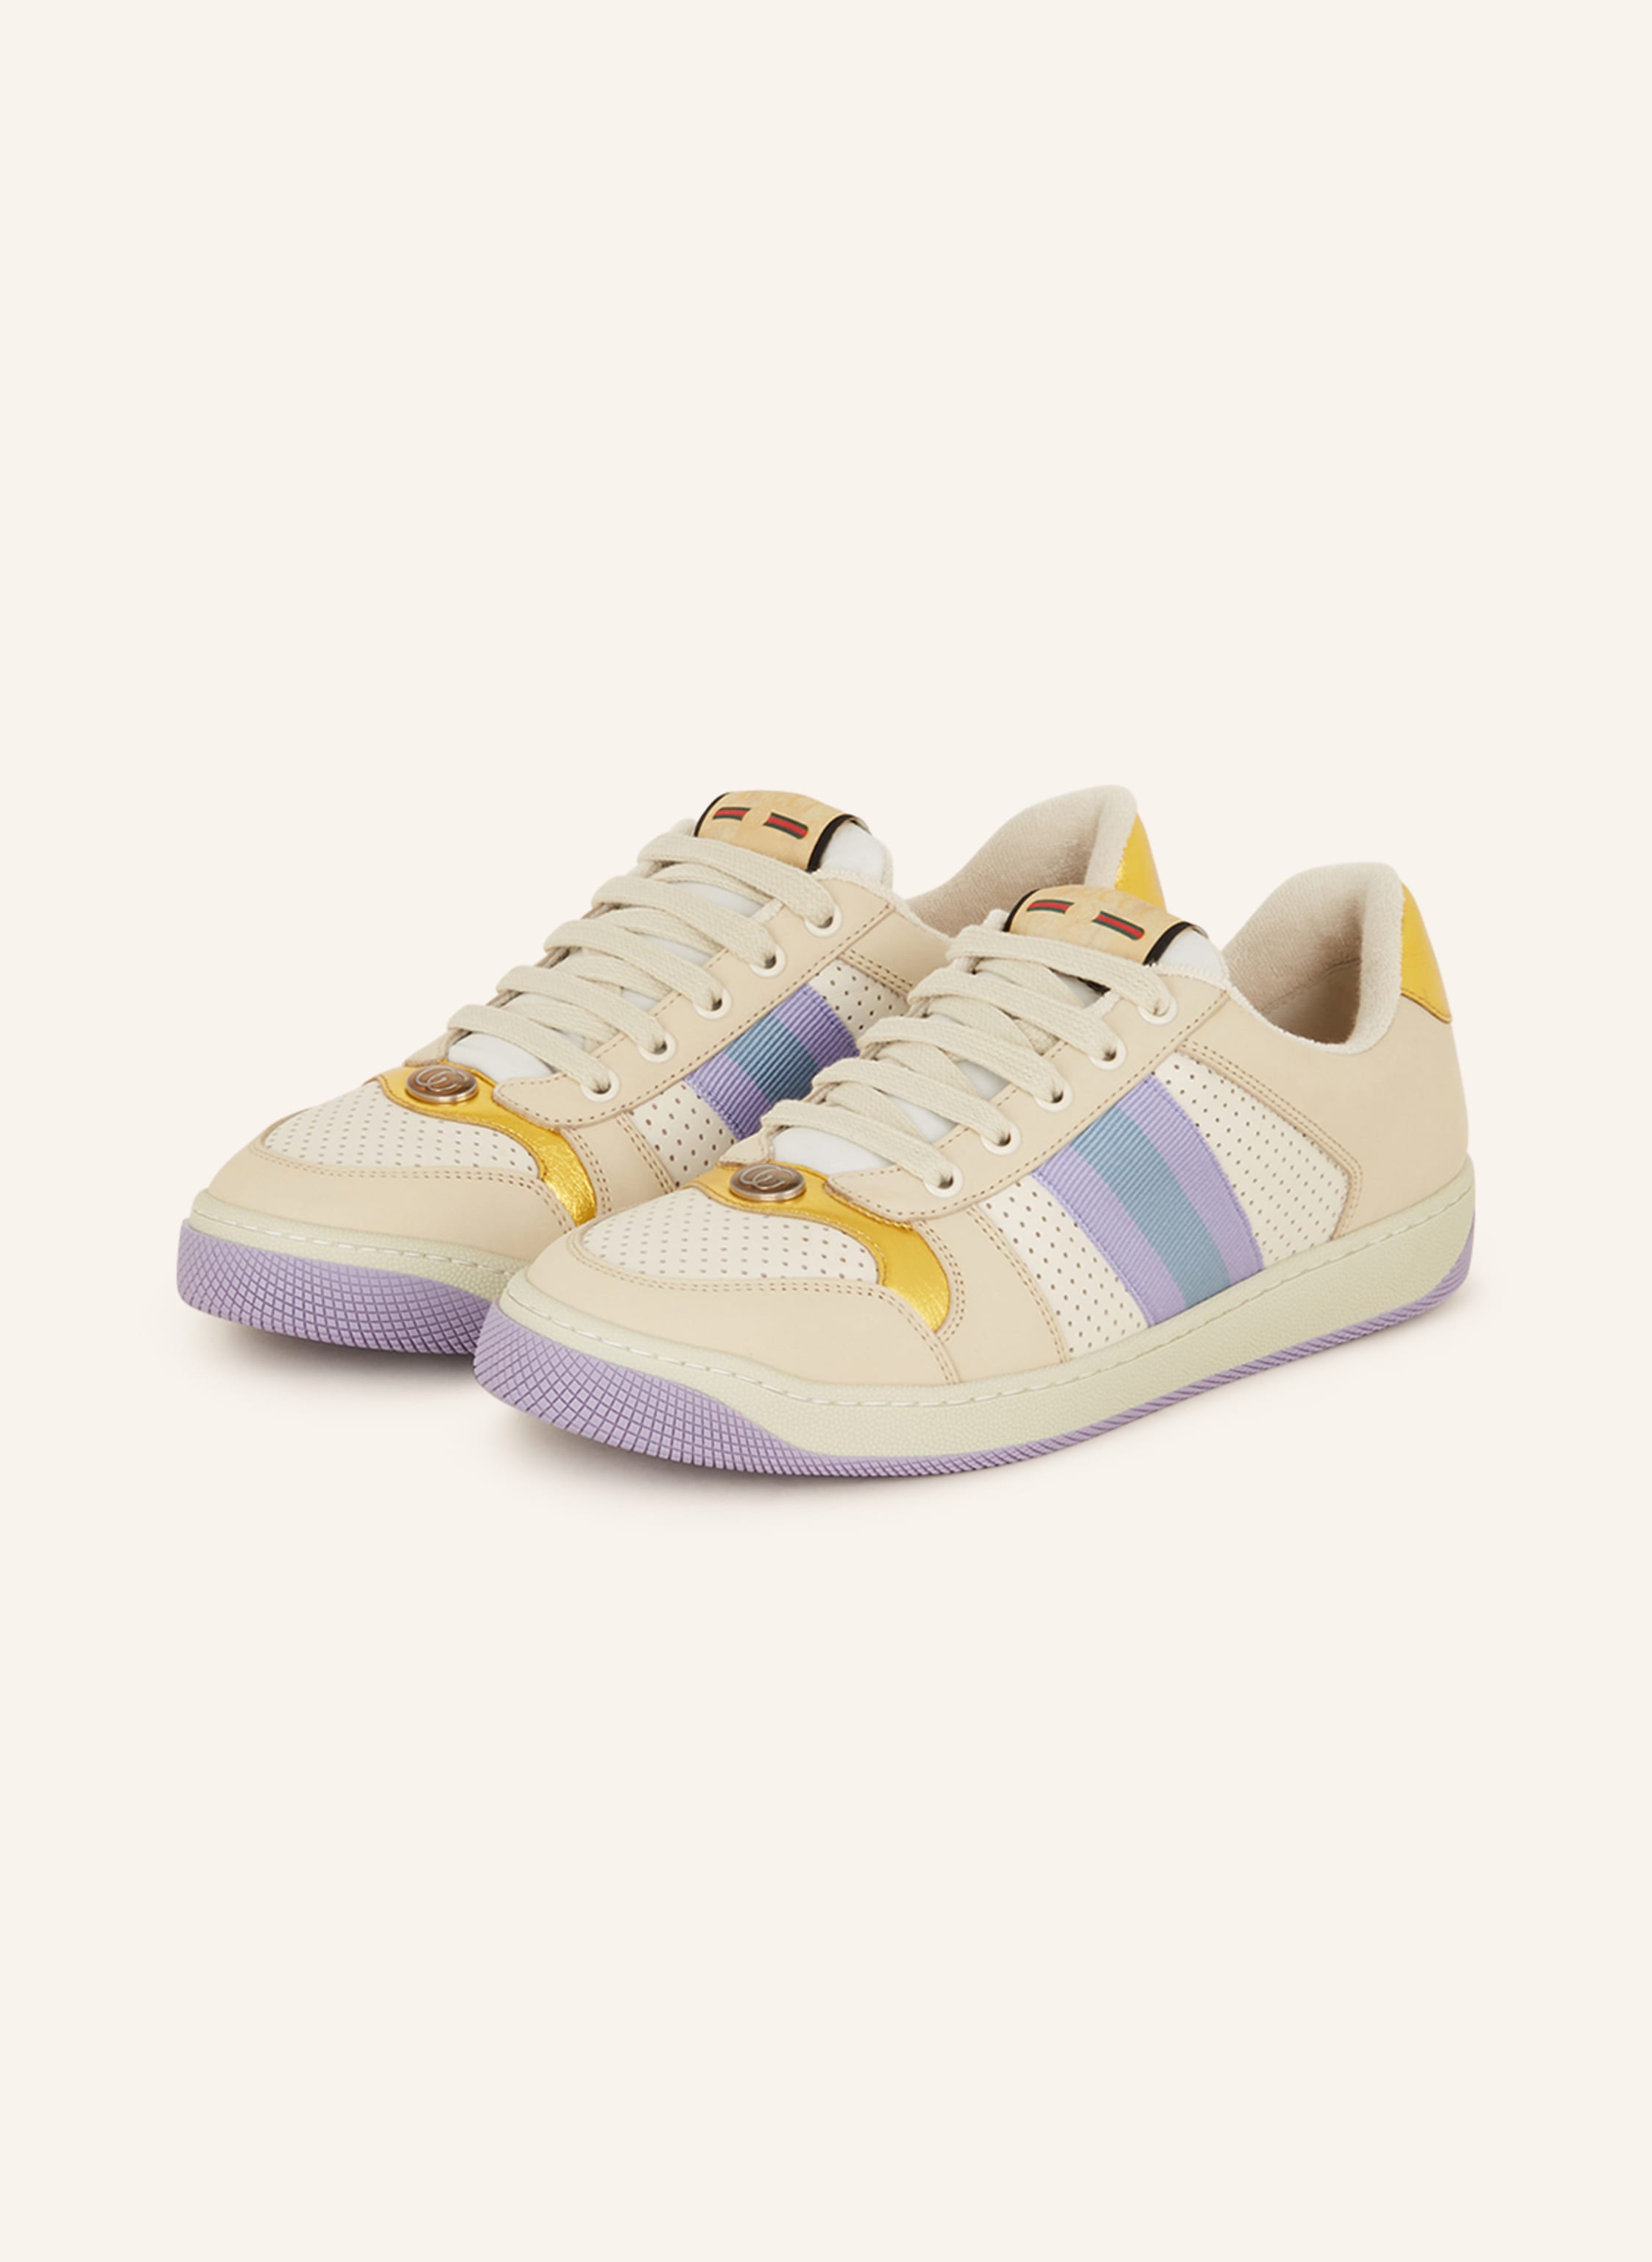 Gucci Men's Ultrapace R Sneakers in Yellow | LN-CC®